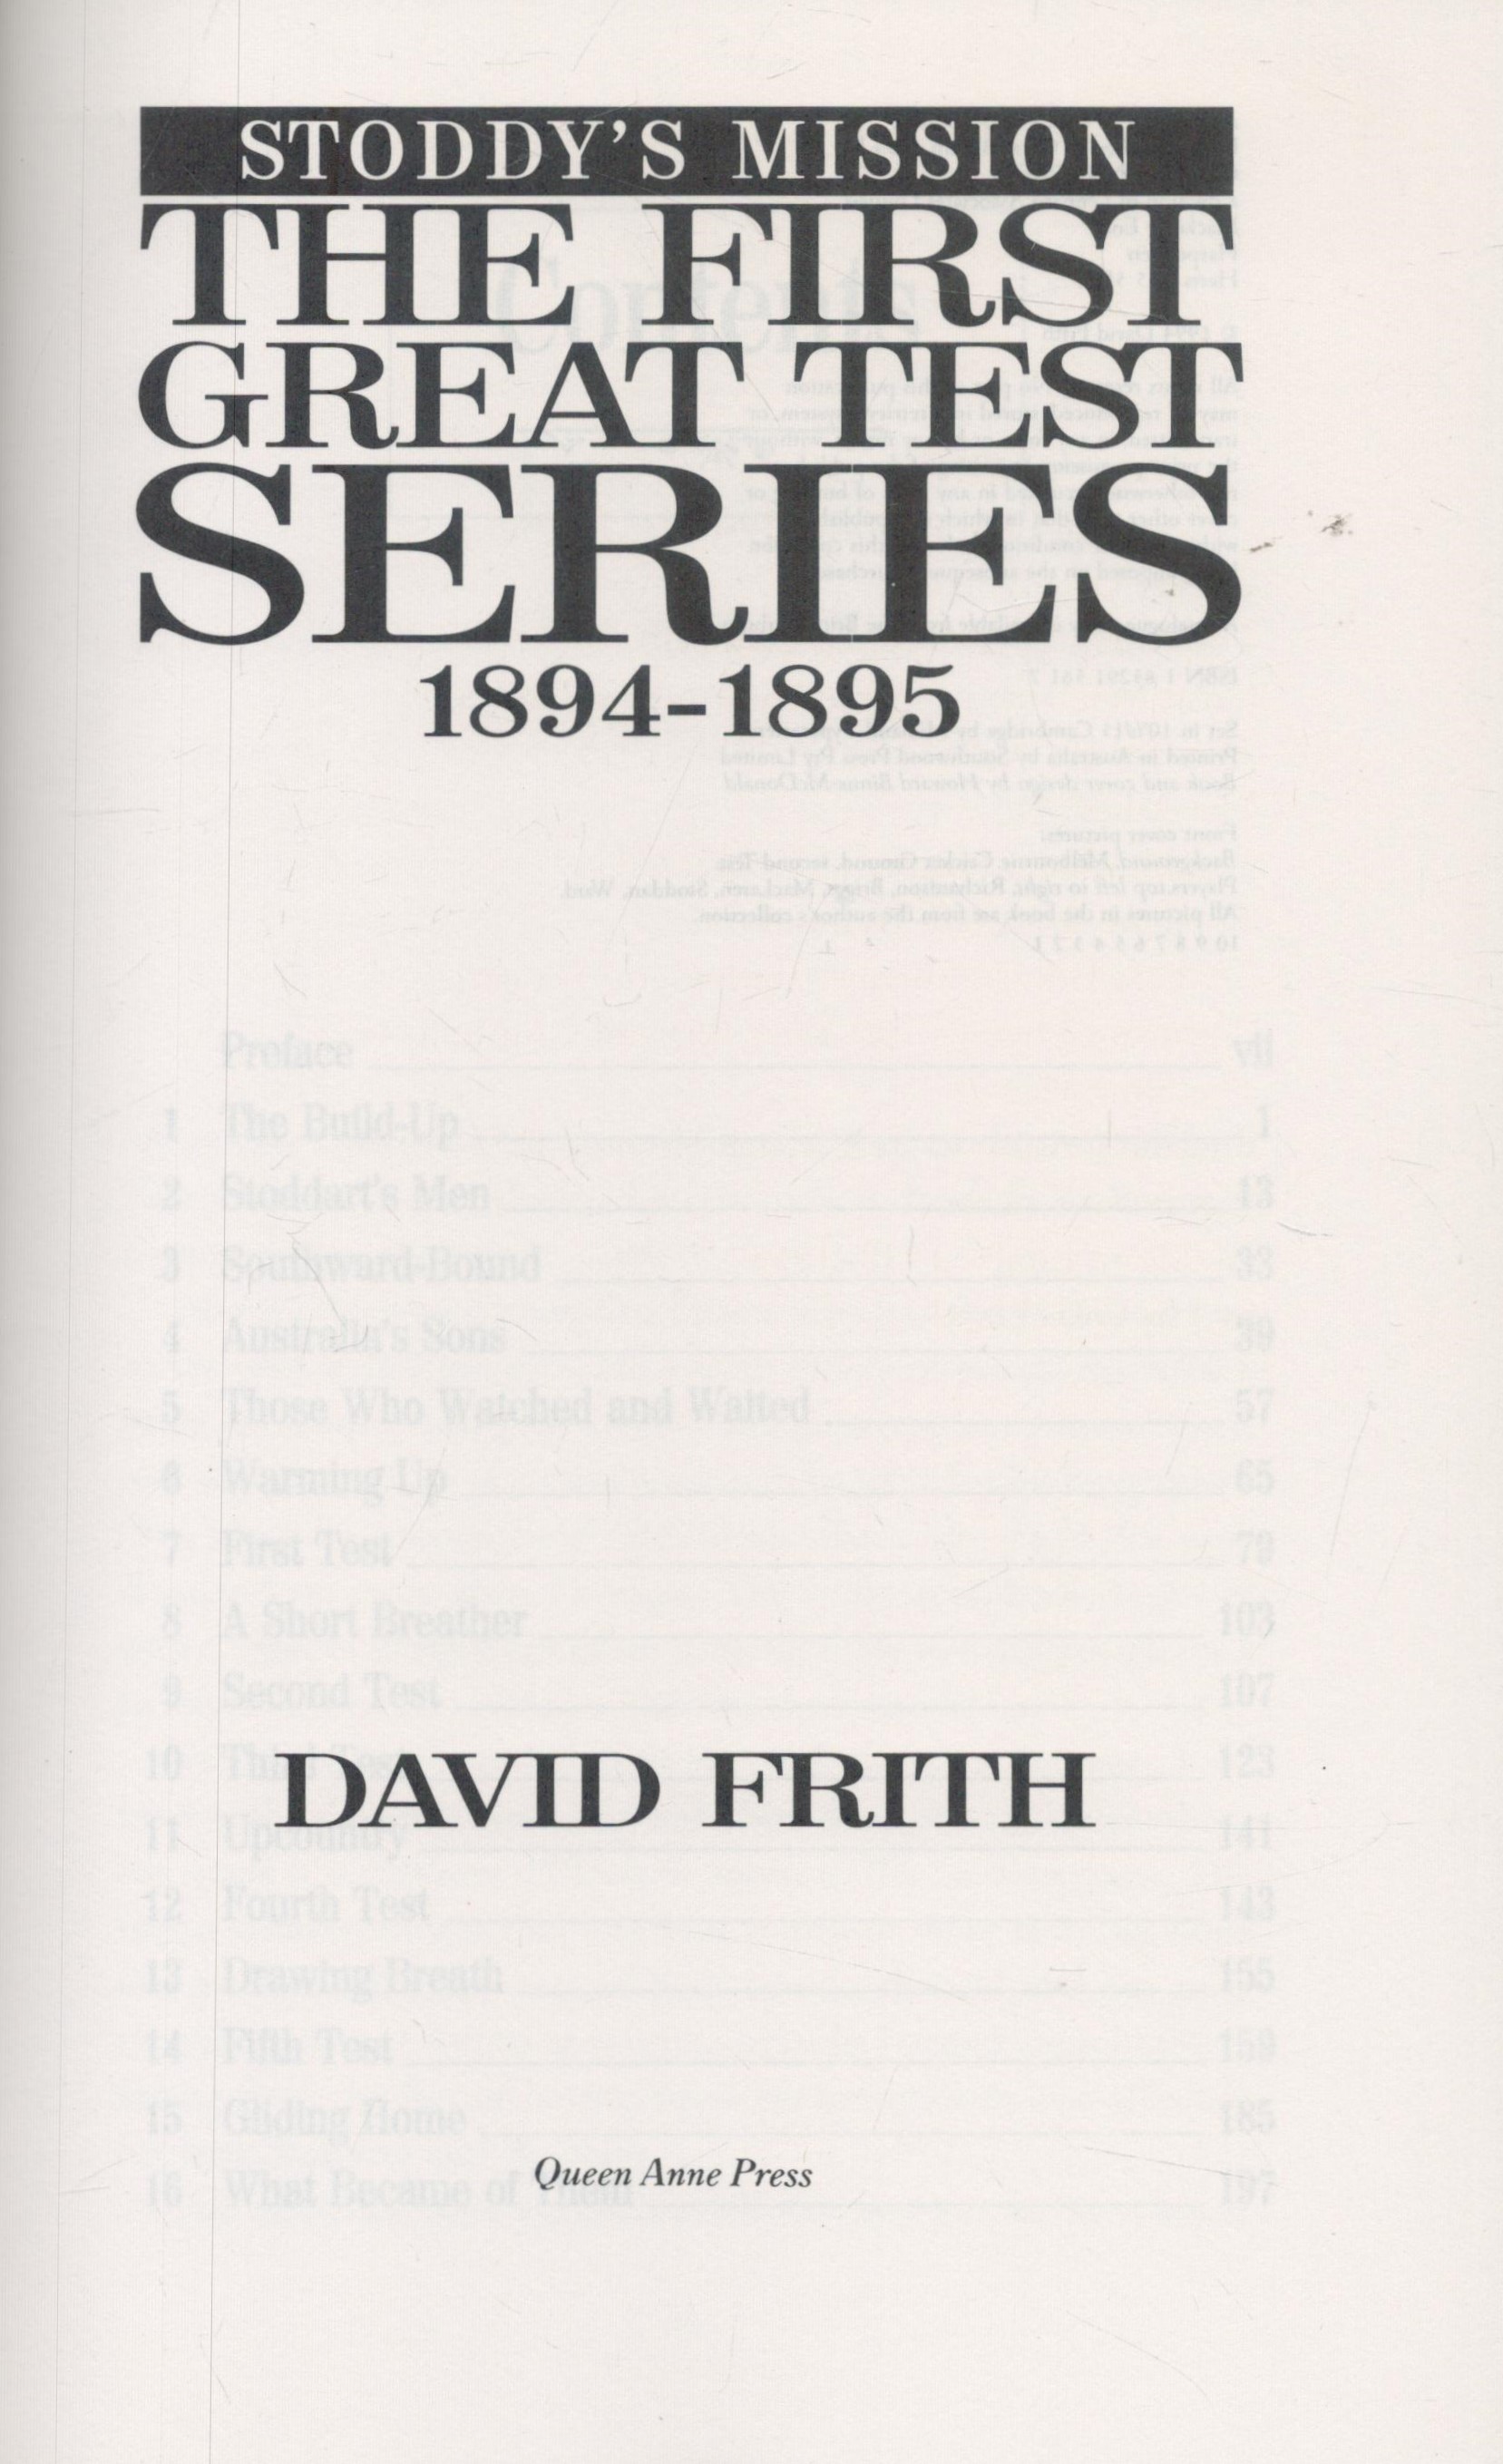 Stoddy`s Mission The First Great Test Series 1894-1985 David Frith Paperback book, 216 pages. Good - Image 2 of 3